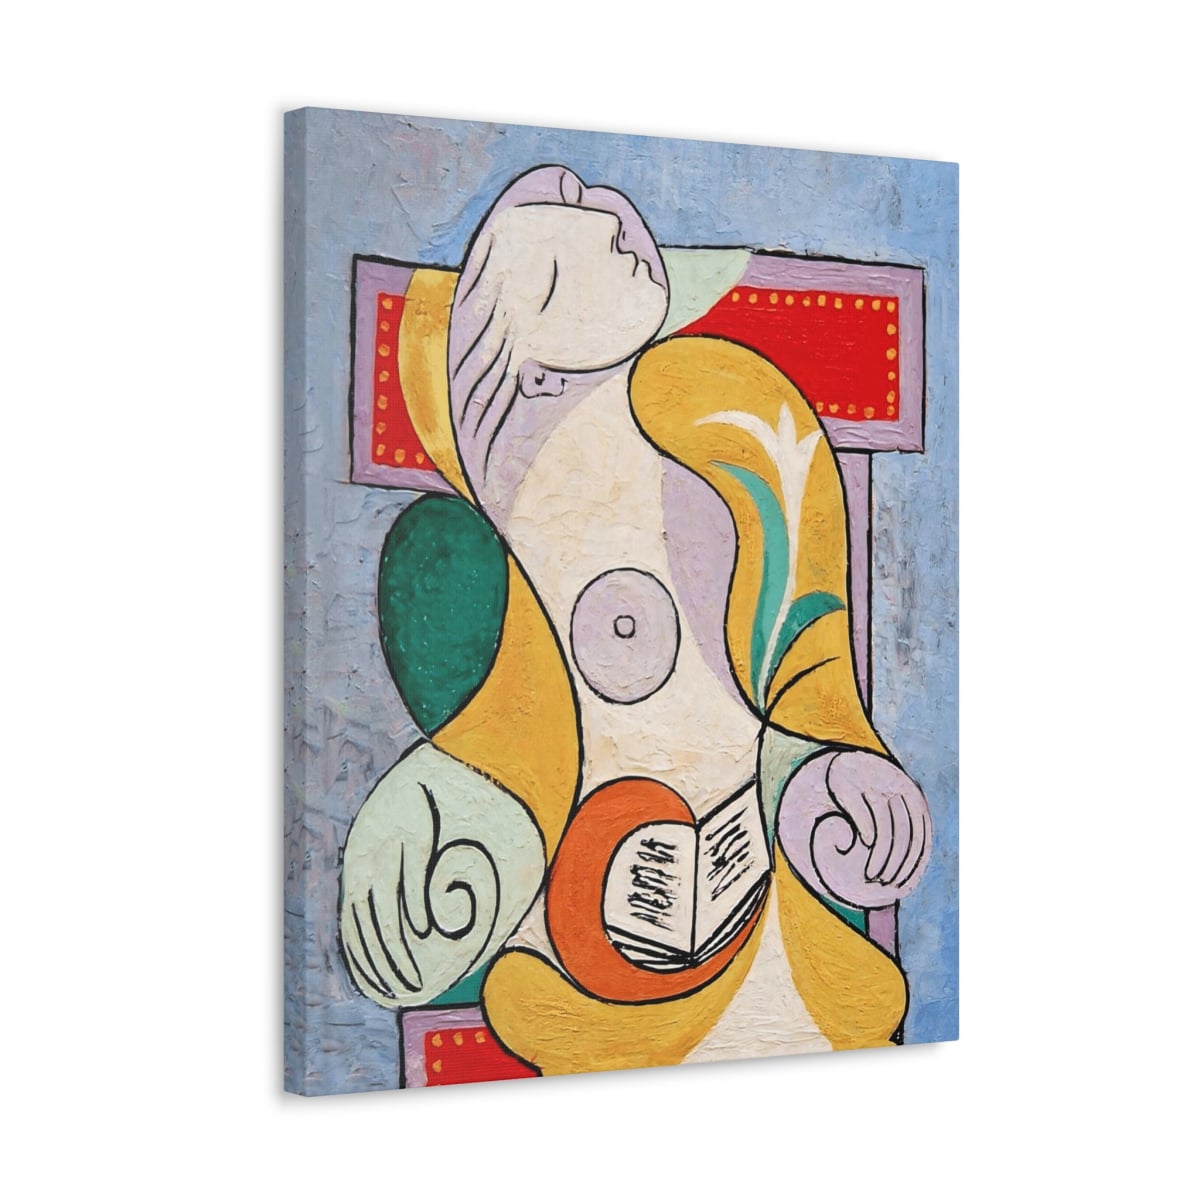 Marie-Thérèse-Walter by Pablo Picasso Canvas Gallery Wrap